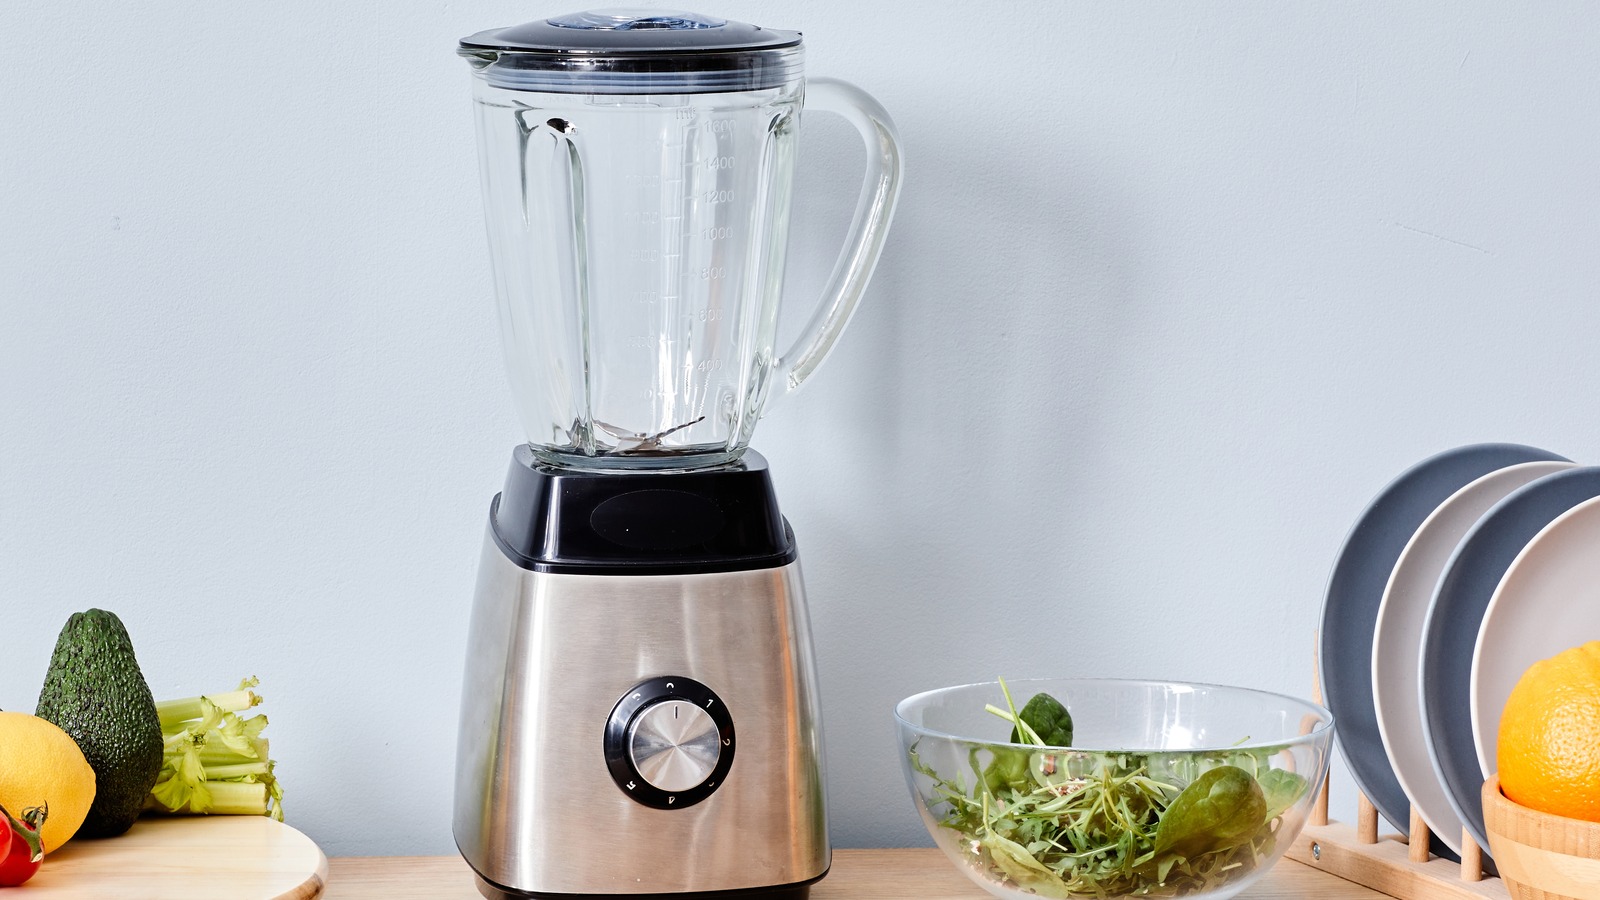 https://www.mashed.com/img/gallery/the-best-food-processors-and-blenders-in-2022/l-intro-1667229380.jpg